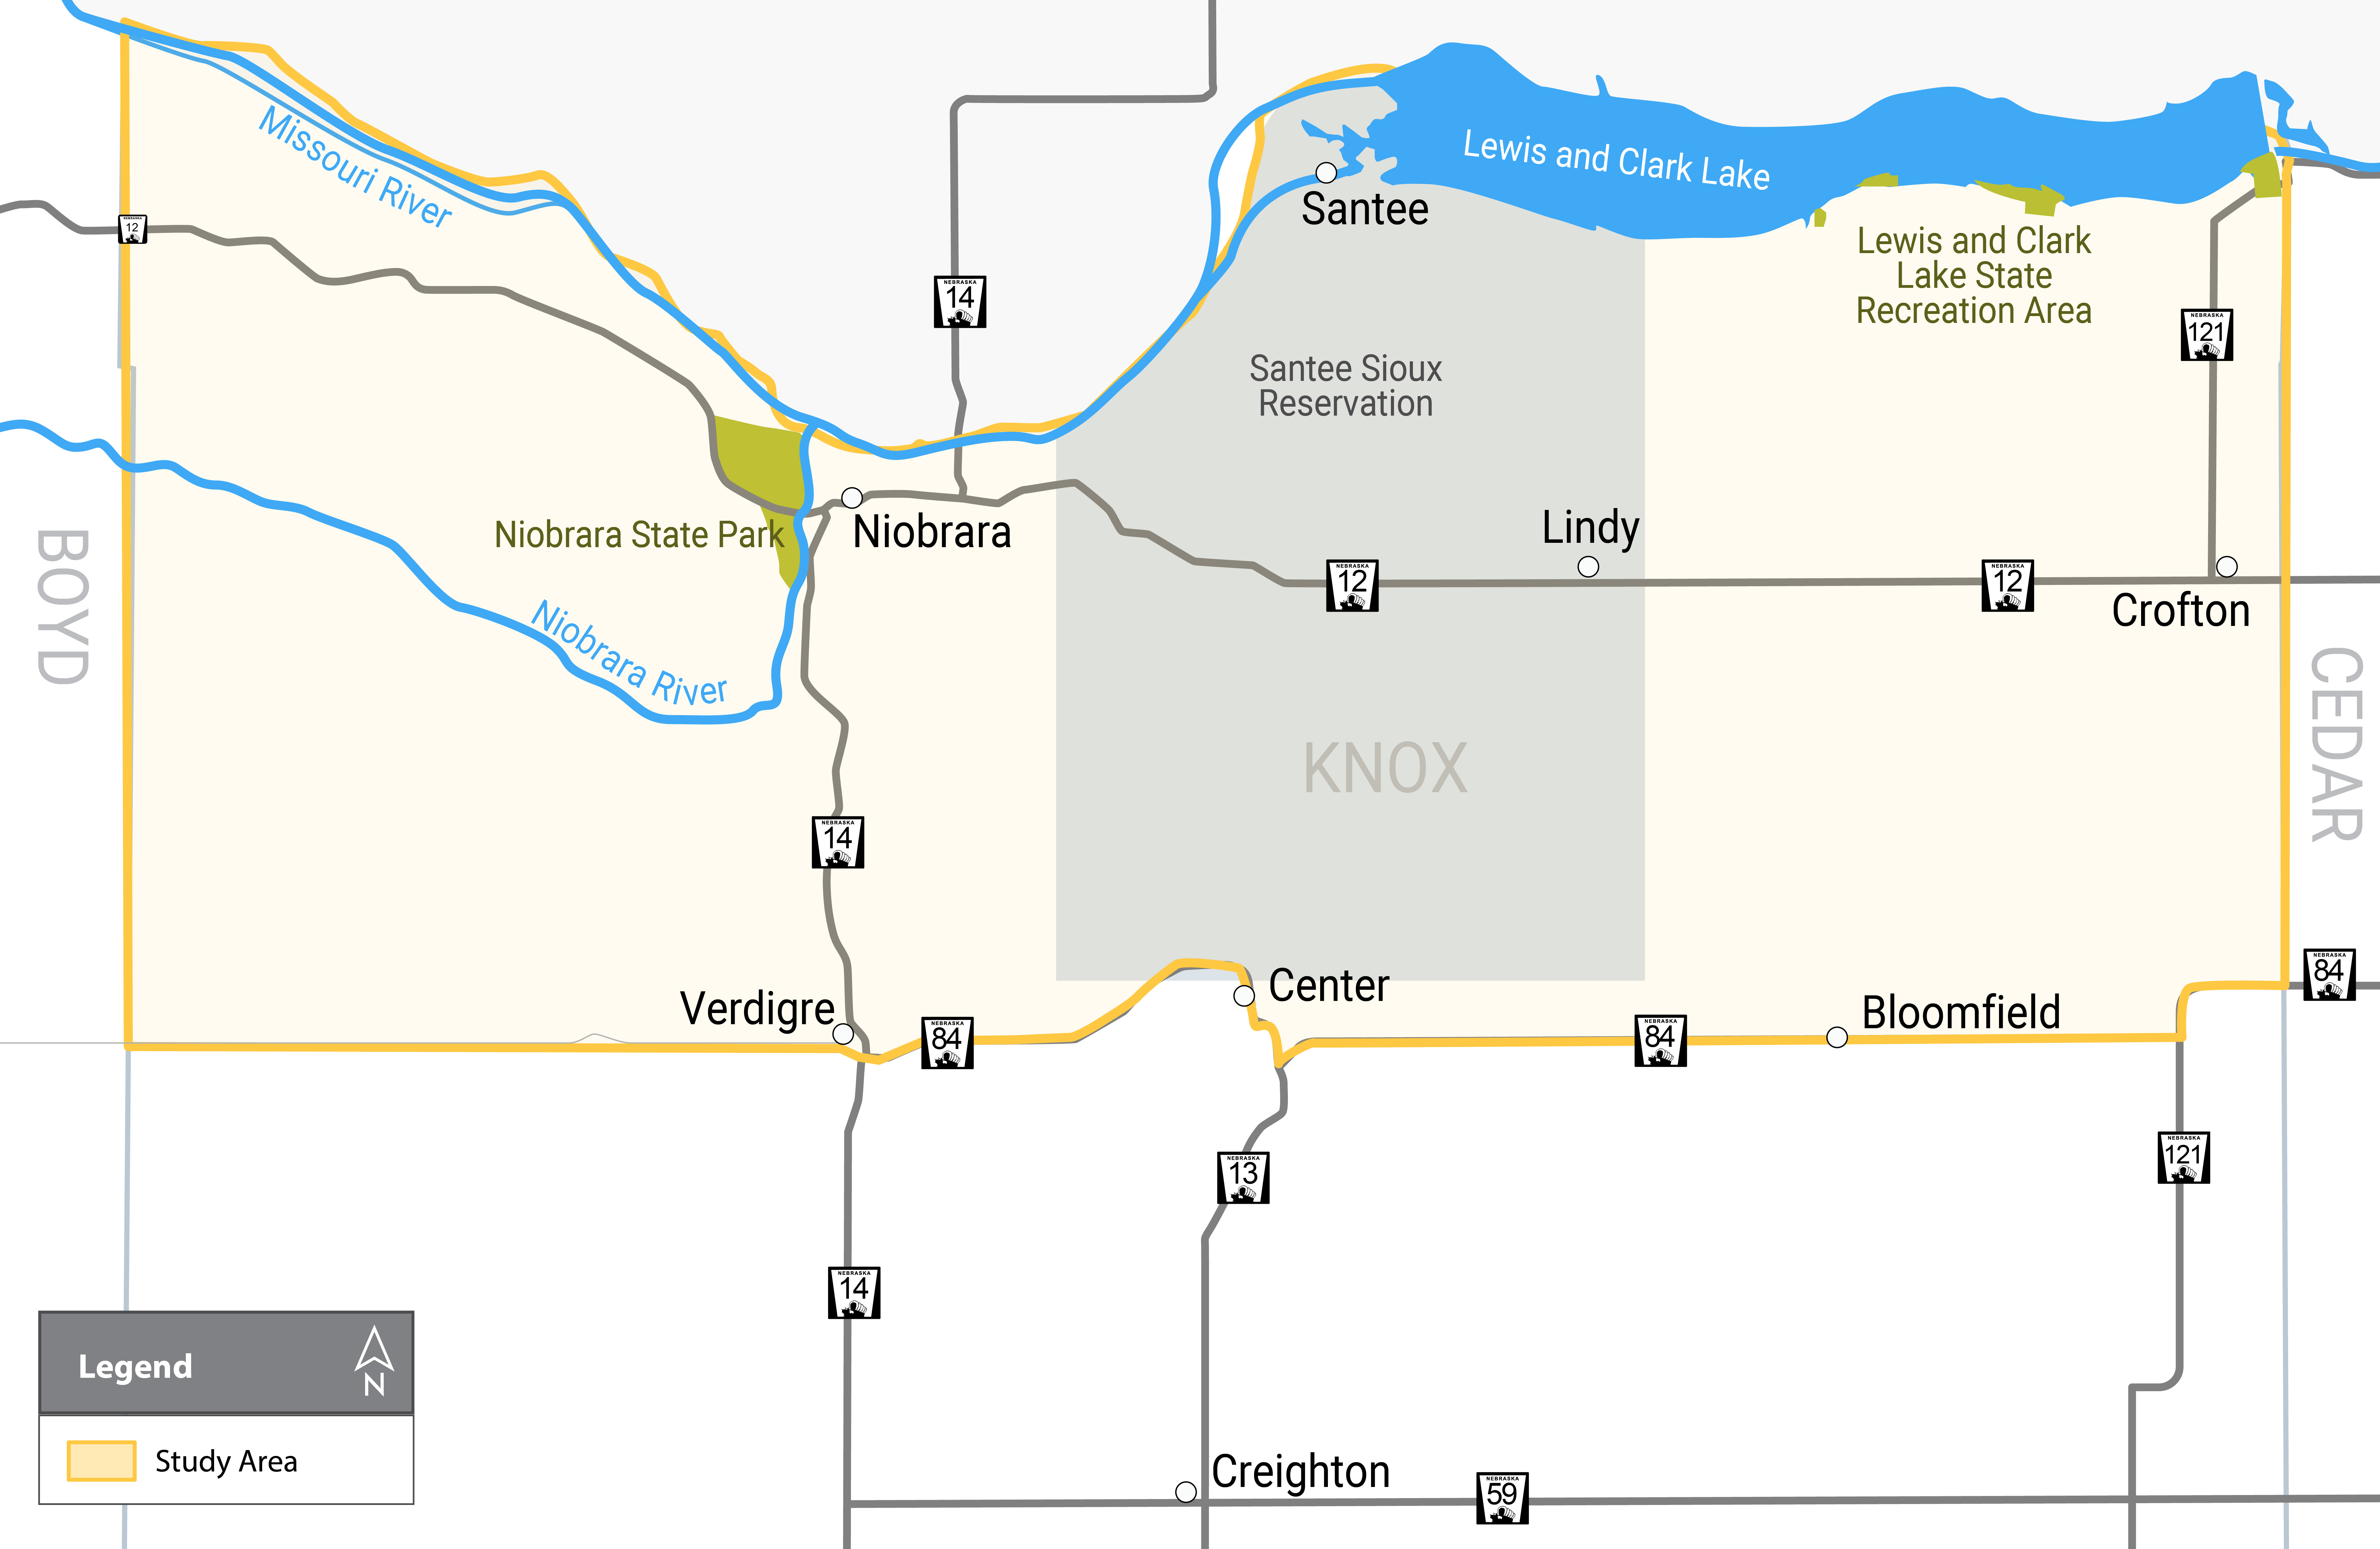 A map of the study scope, which is in Knox County, highlights the Niobrara and Missouri Rivers, Lewis and Clark Lake, and the cities of Niobrara, Verdigre, Center, Lindy, Bloomfield and Crofton. The map also highlights Niobrara State Park and Lewis and Clark Lake State Recreation Area. 